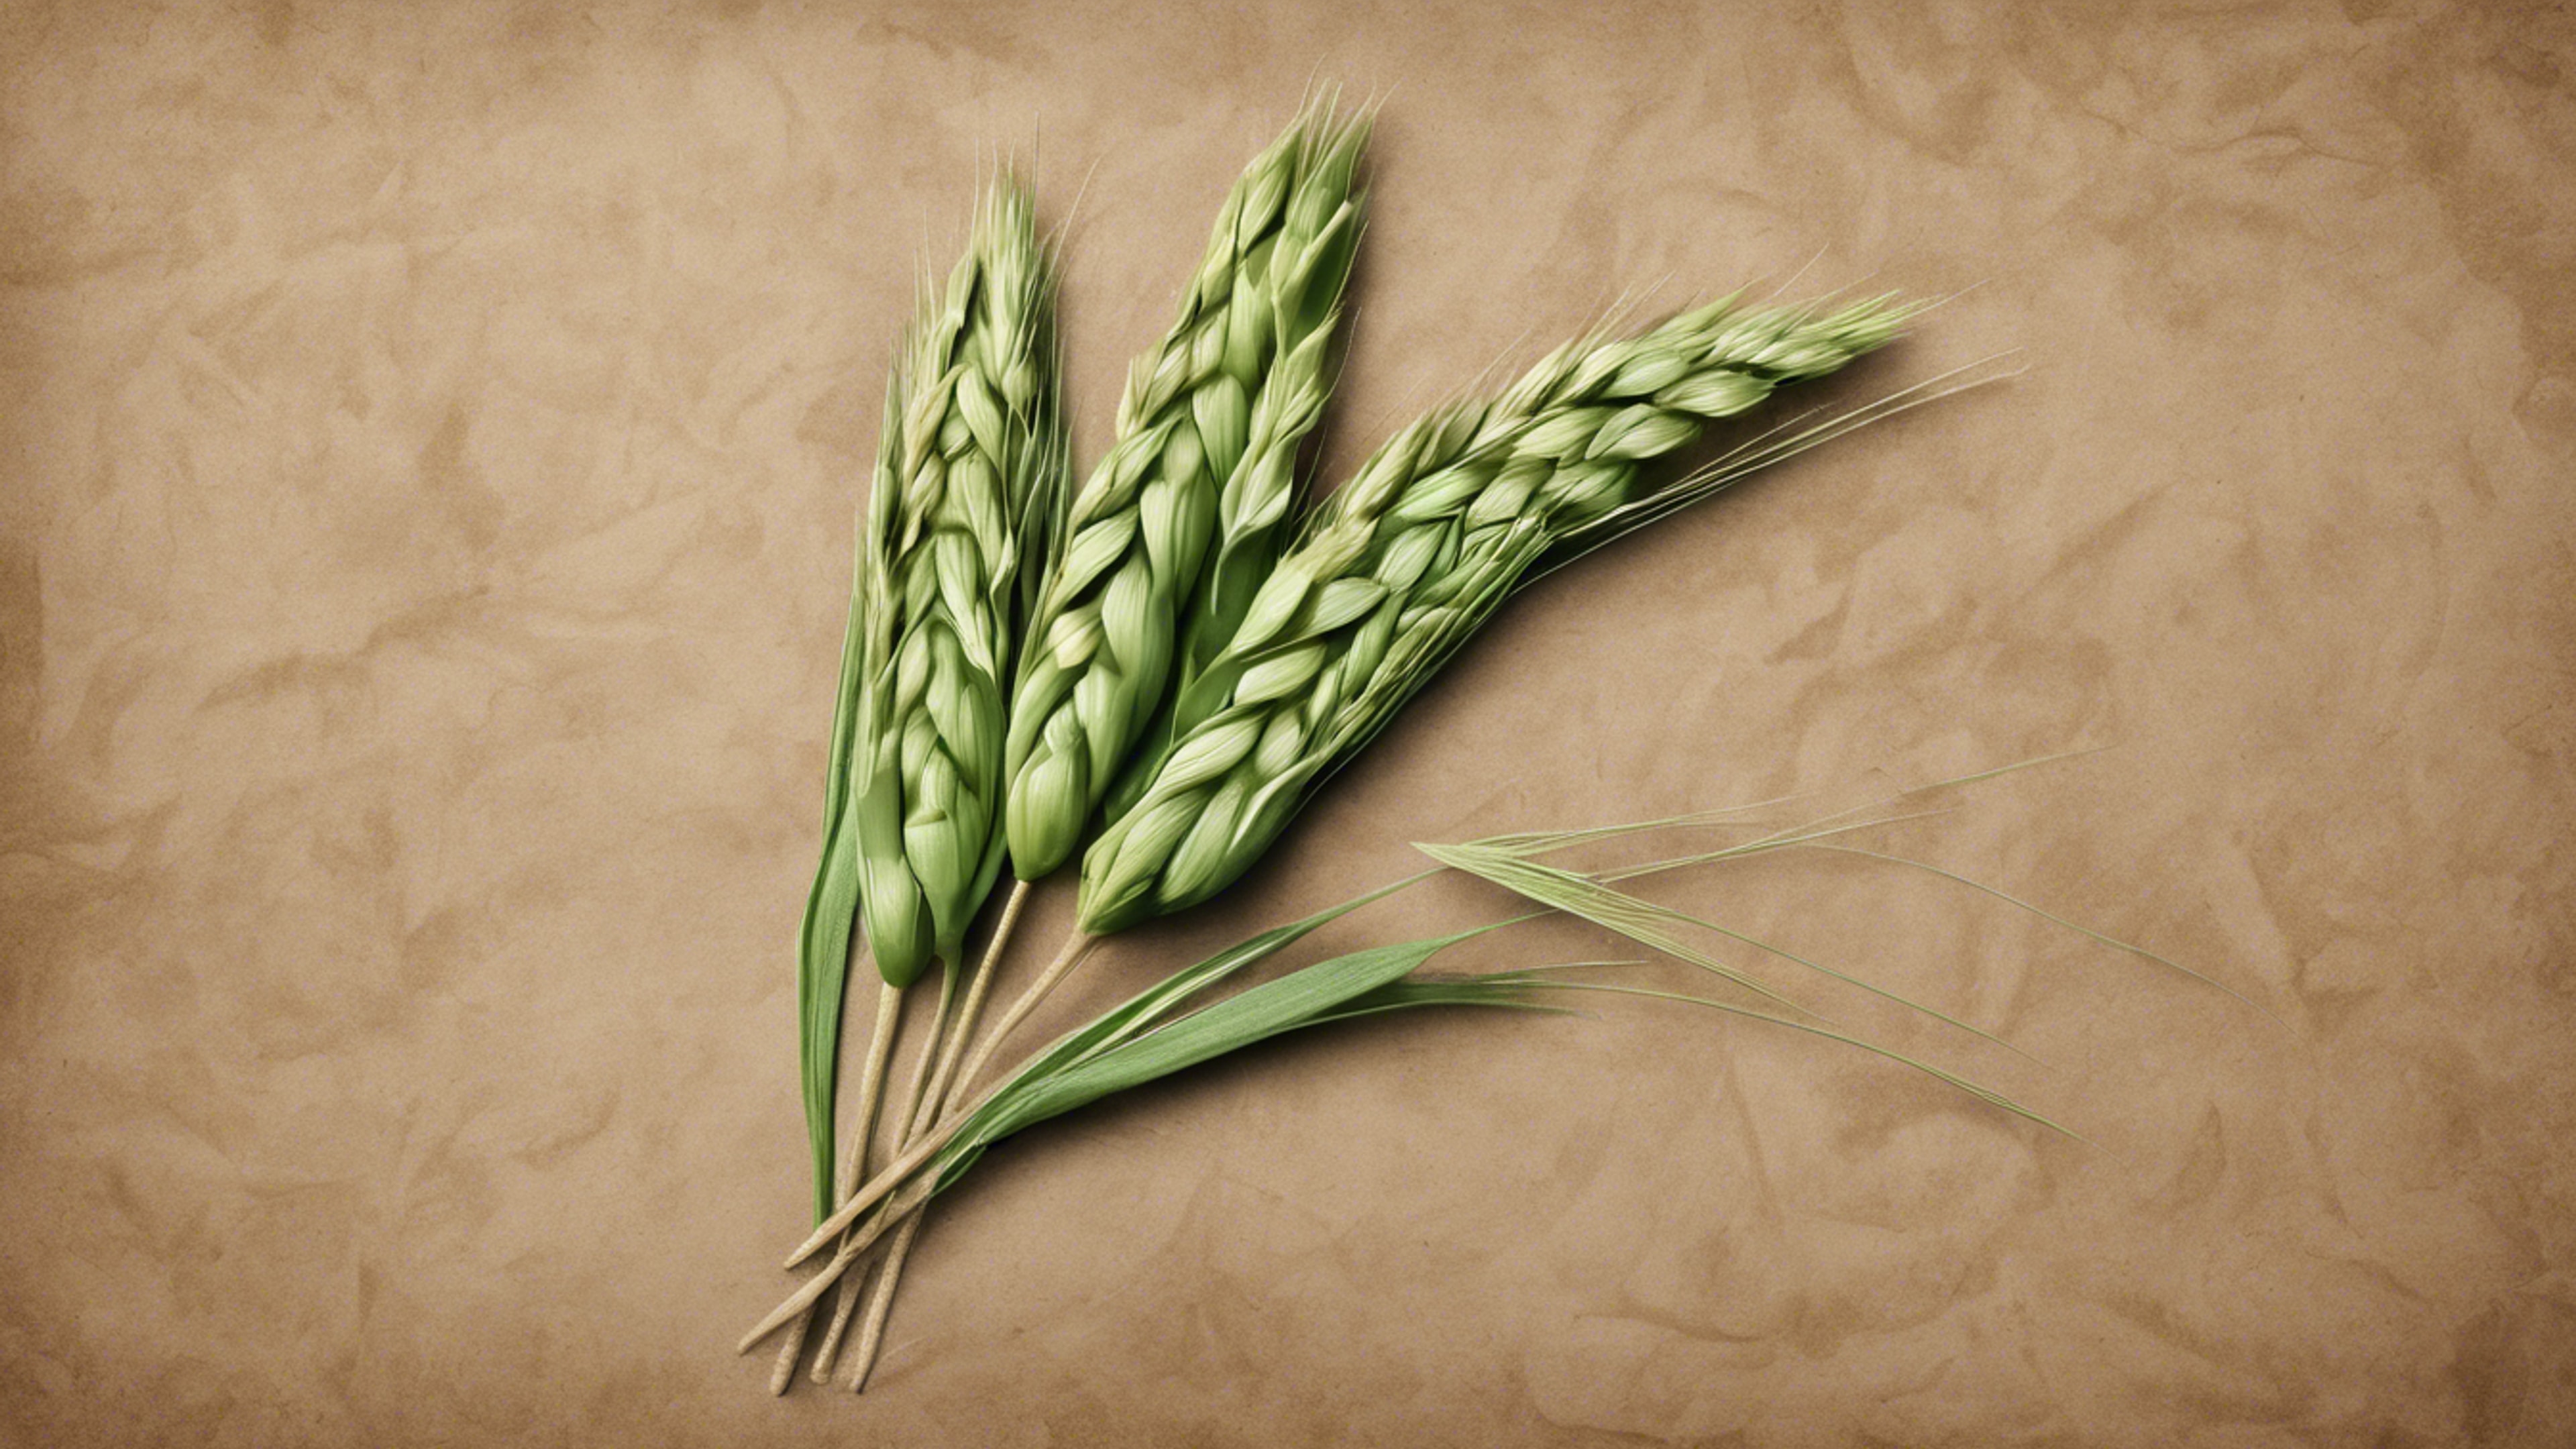 A detailed botanical illustration of a stalk of green wheat against an aged brown paper background. Ταπετσαρία[958050ab552342b3bed0]